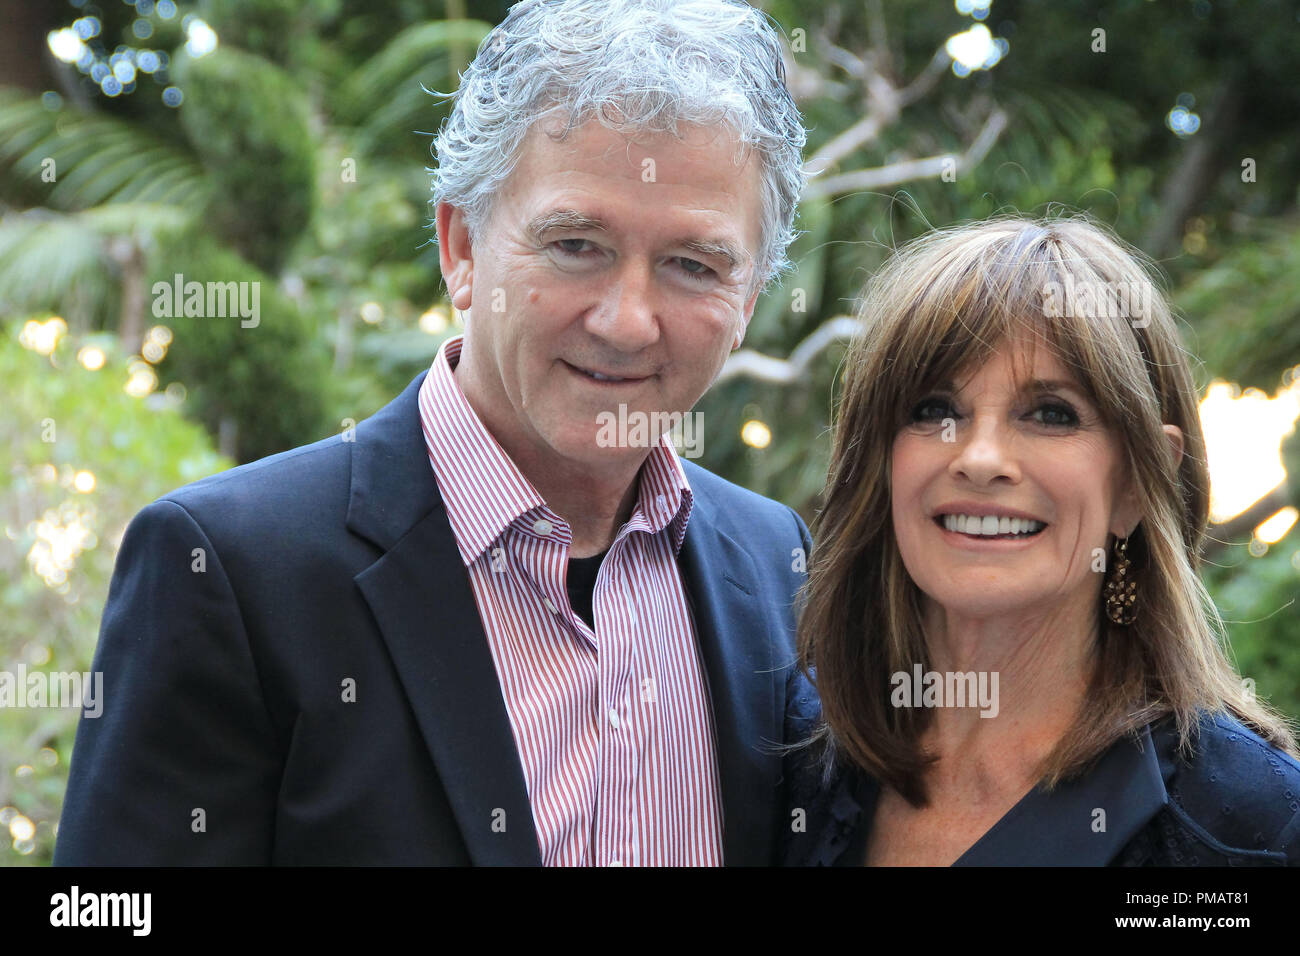 Patrick Duffy and Linda Gray "Dallas" TV Series Portrait Session, 2013. Reproduction by American tabloids is absolutely forbidden. File Reference # 32081 034JRC Editorial Use Only - All Rights Reserved Stock Photo - Alamy